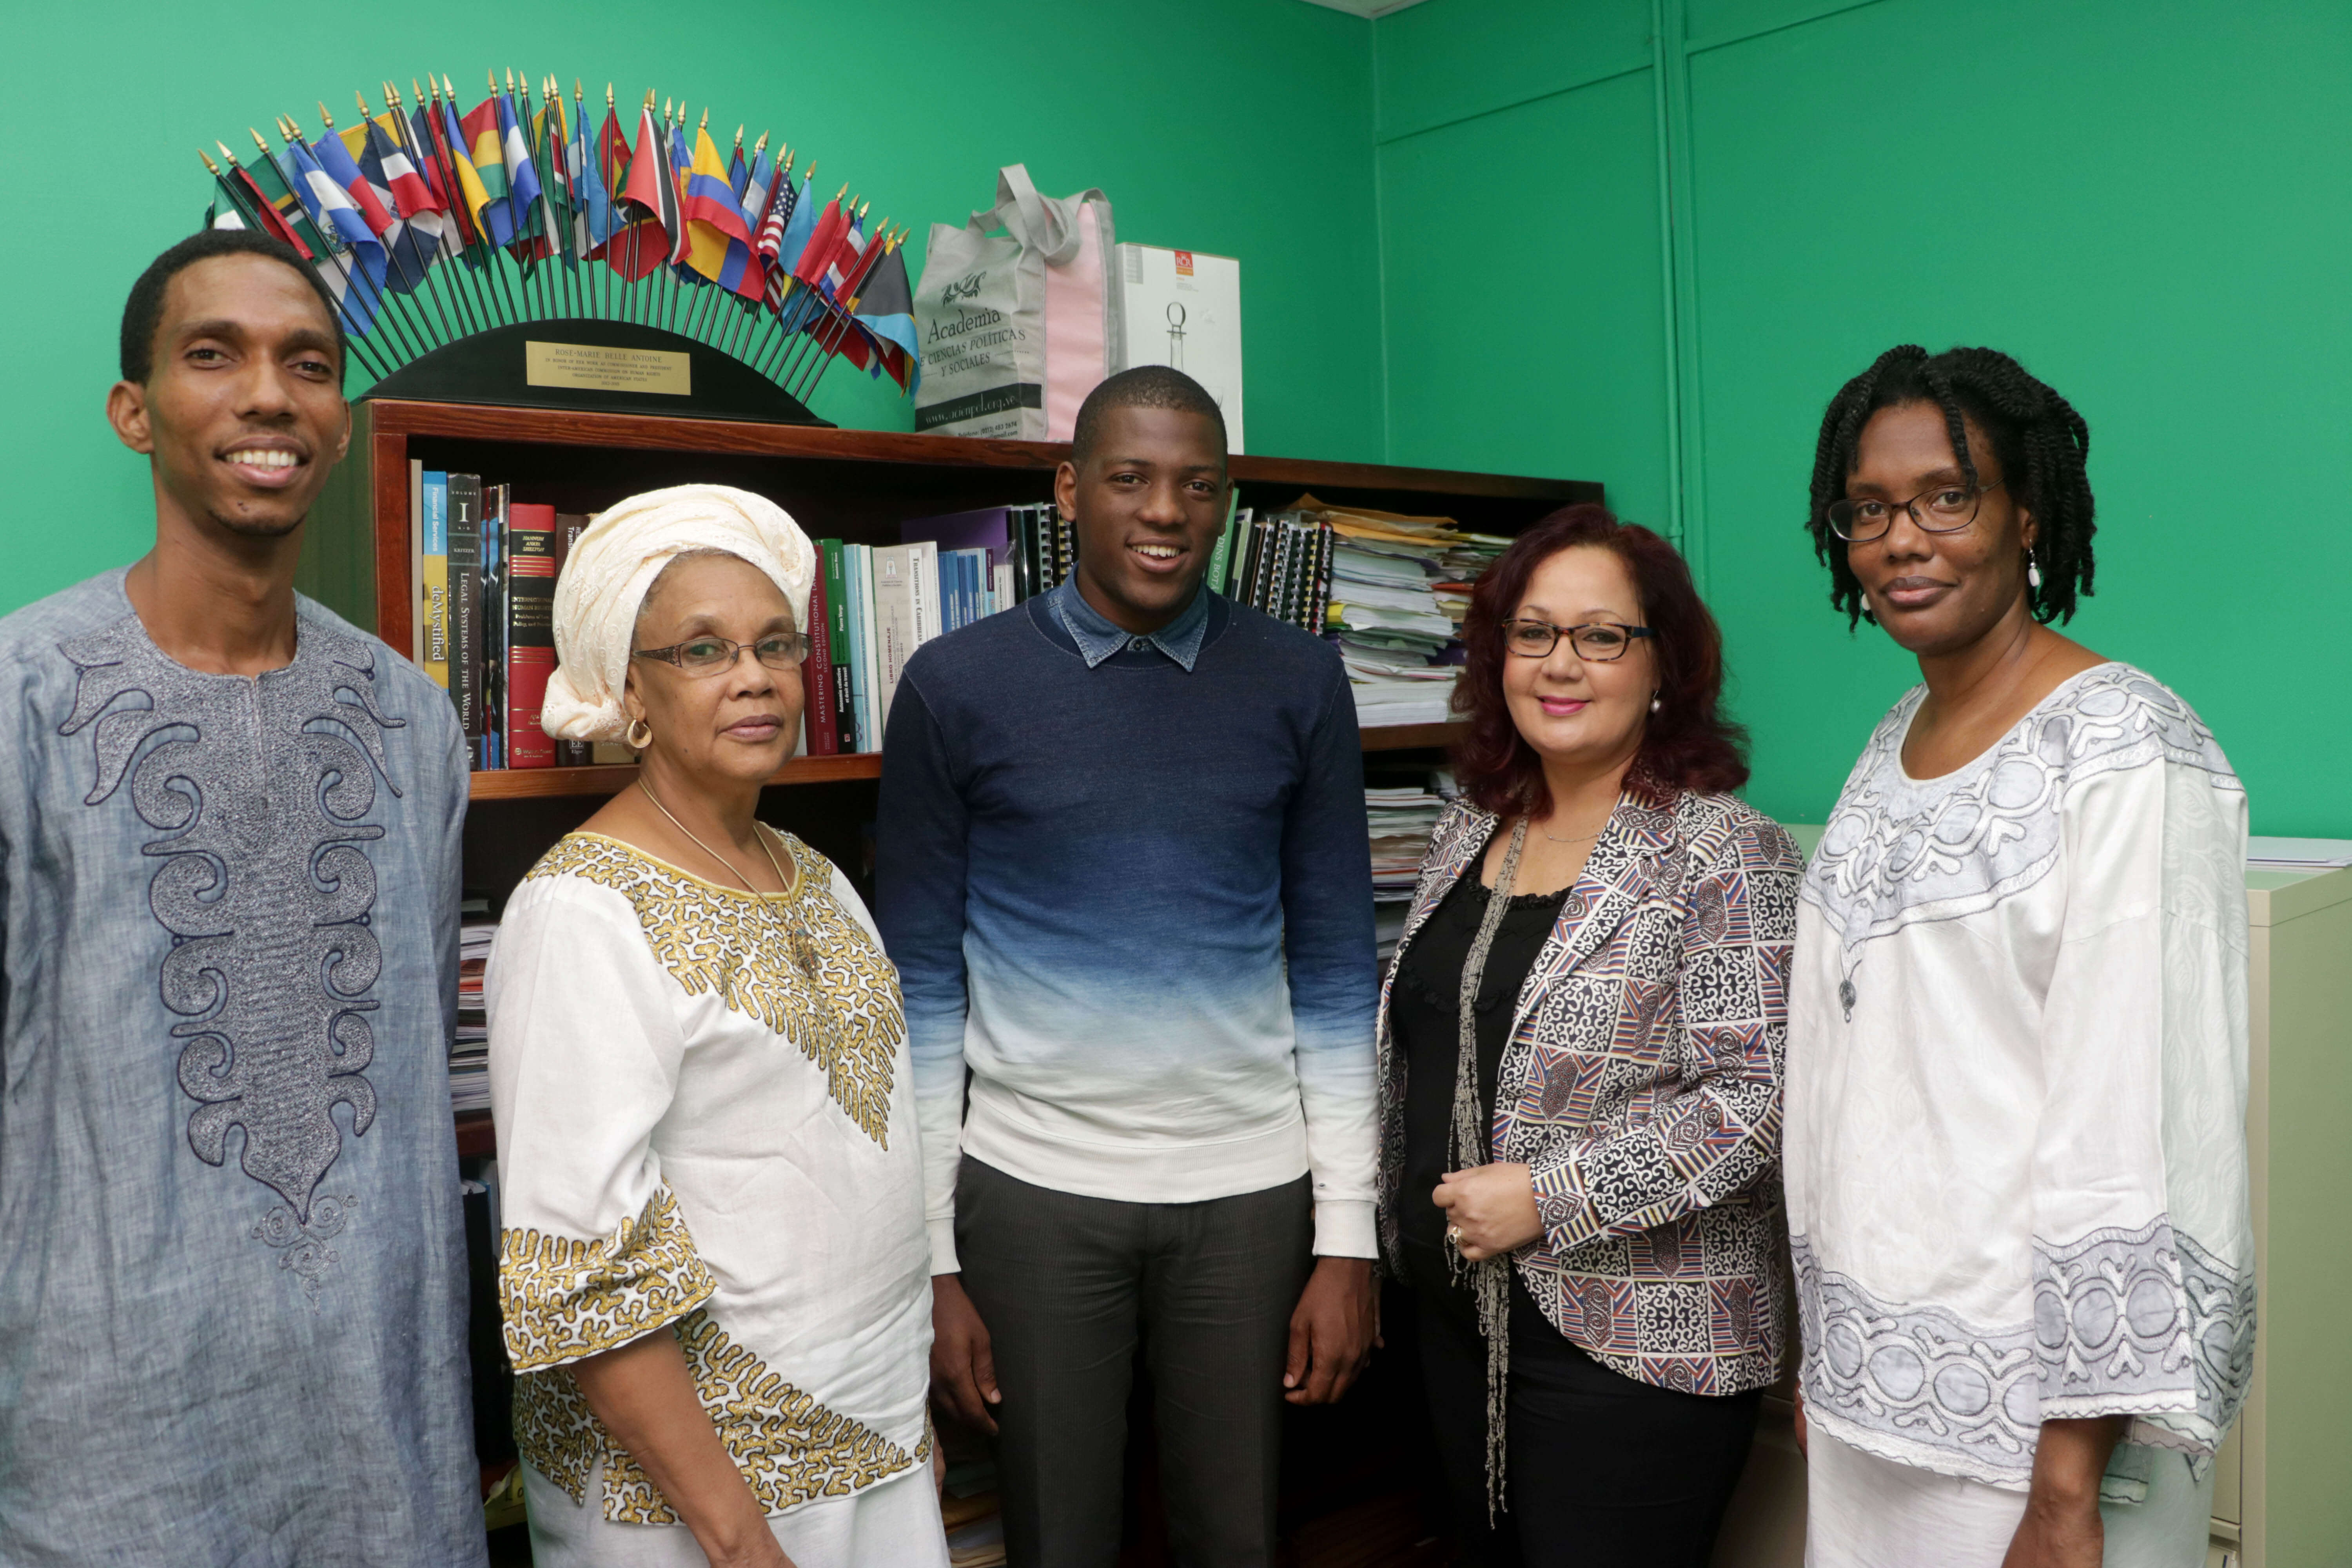 The family of Makandal Daaga: from left, Akhenaton Daaga, his mother Liseli and sister, Karomana, at right, with Kareem Marcelle, scholarship winner, and Professor Rose-Marie Belle-Antoine, Dean of the Faculty of Law